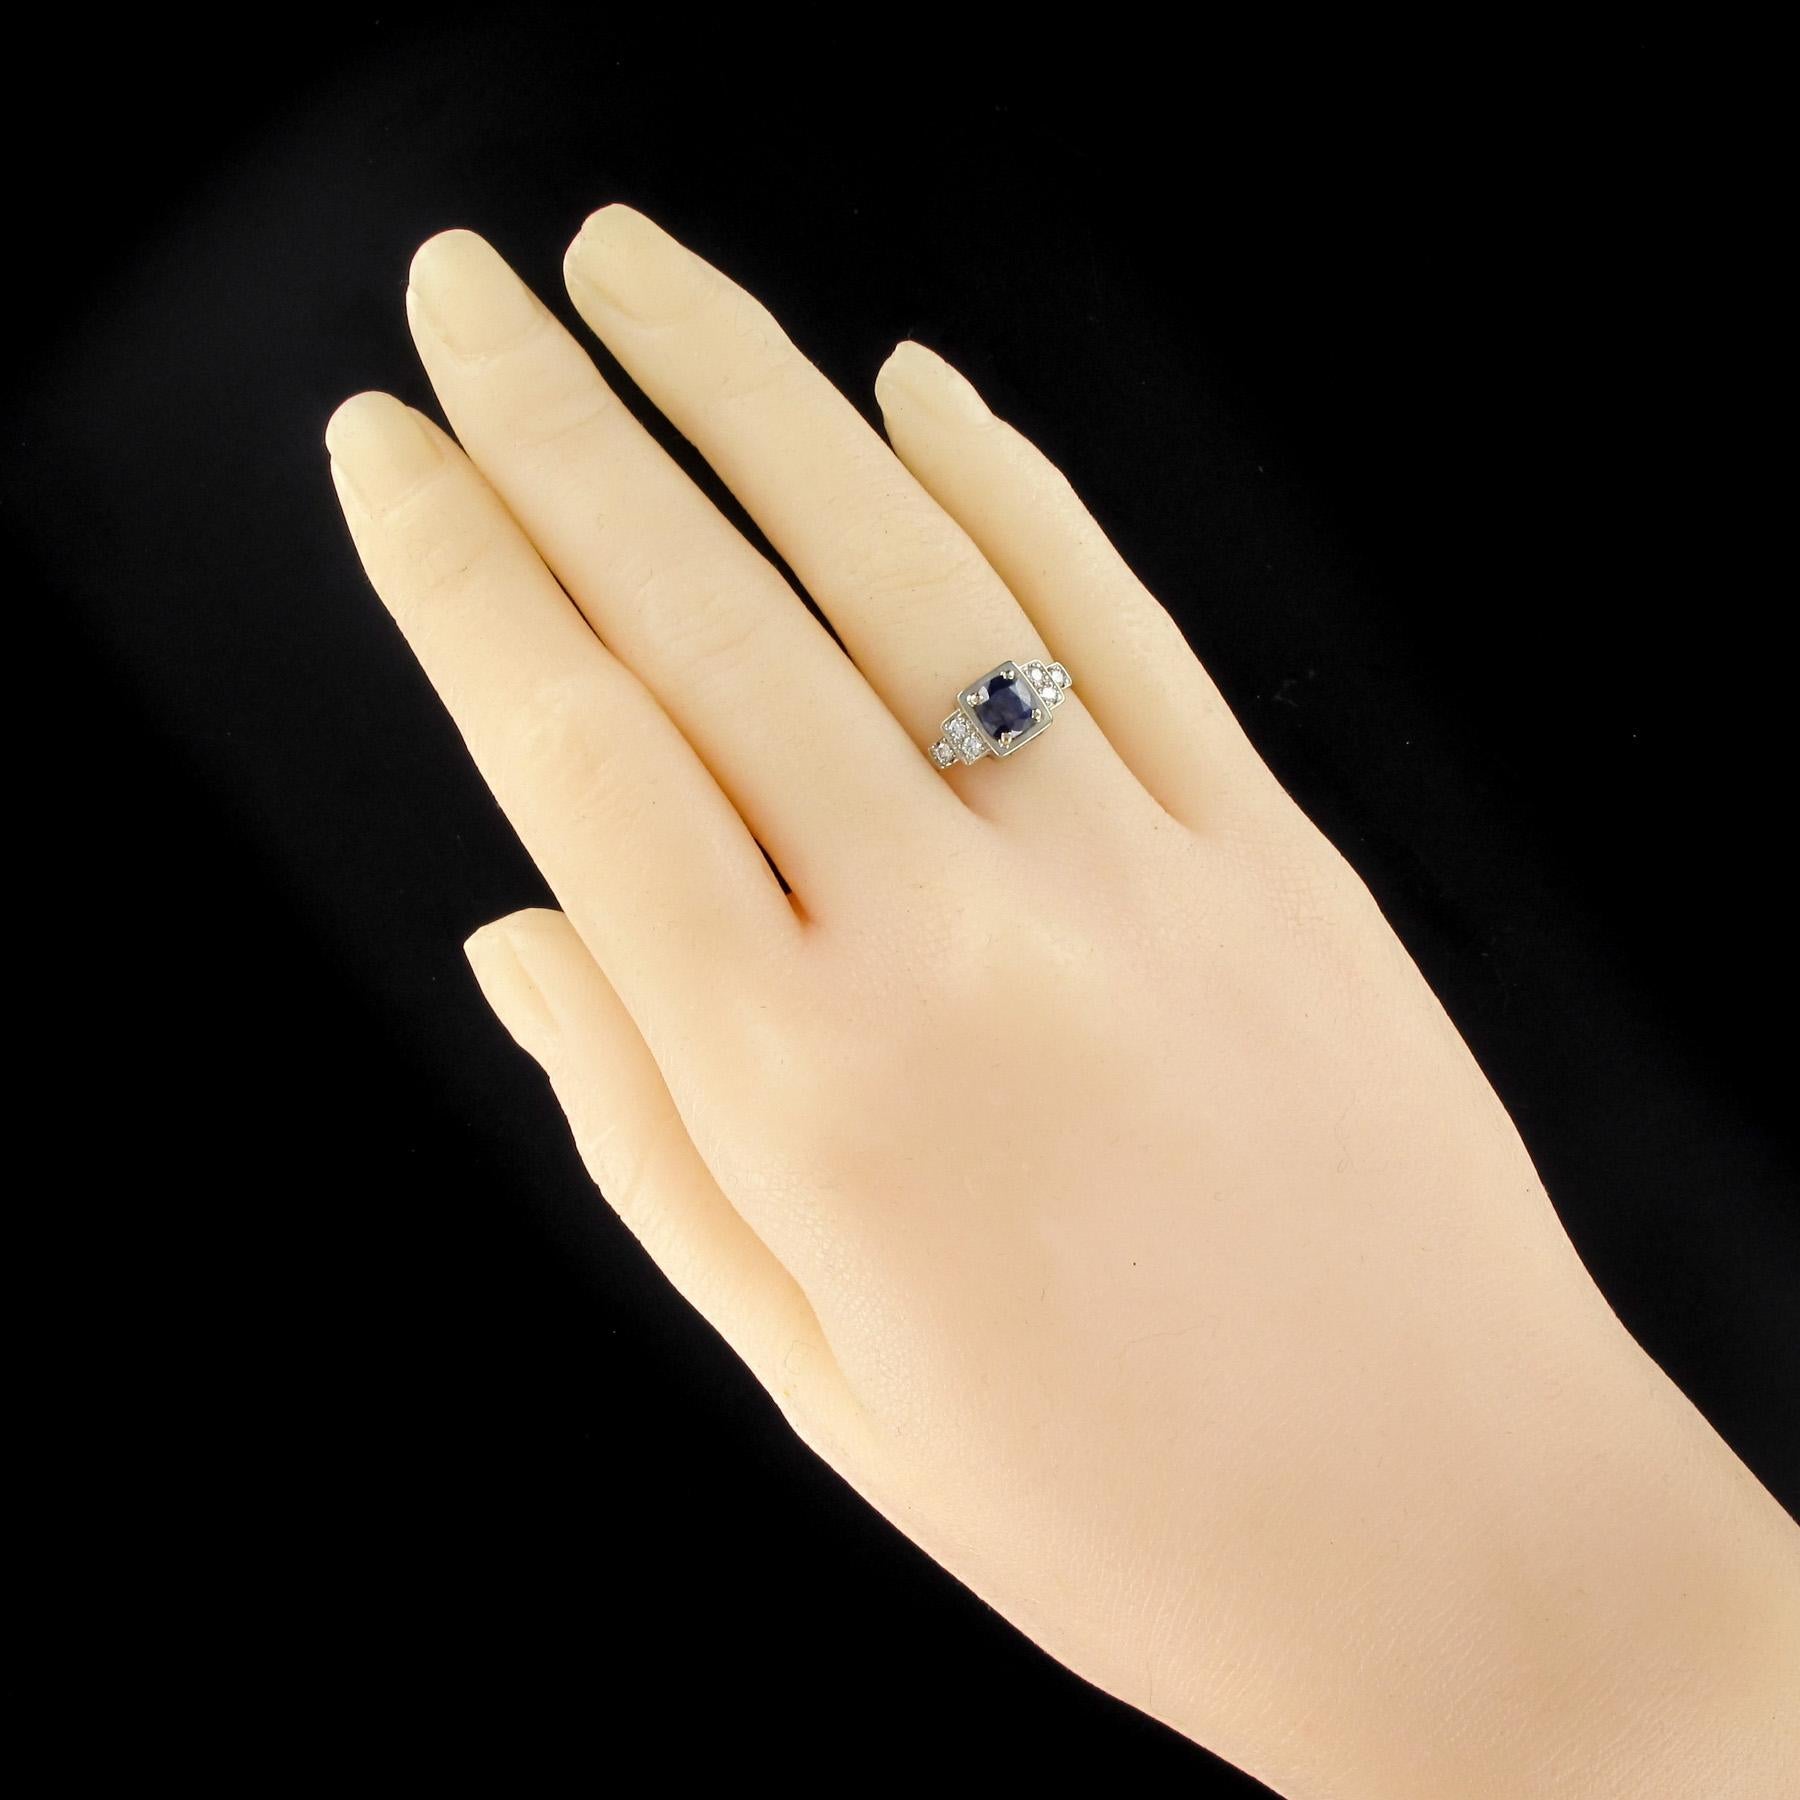 Ring in 18 karats white gold, eagle's head hallmark.
Art Deco style ring, this beautiful white gold ring is set with 4 claws on a rectangular set by a cushion cut sapphire of a beautiful deep blue and bright. On either side of the head are set 2 x 3